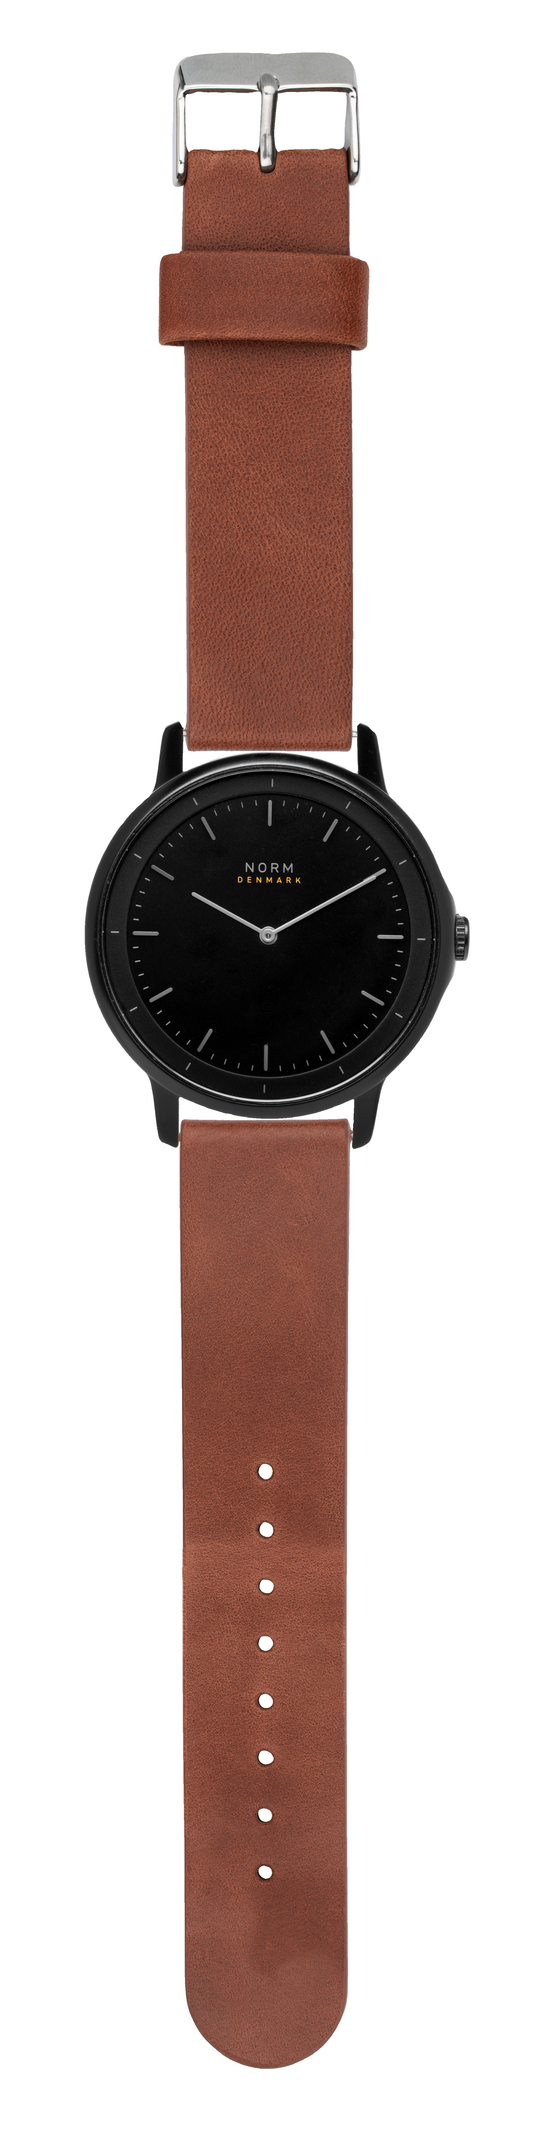 Leather Watch Bands | Brown Watch Bands | NORM Denmark